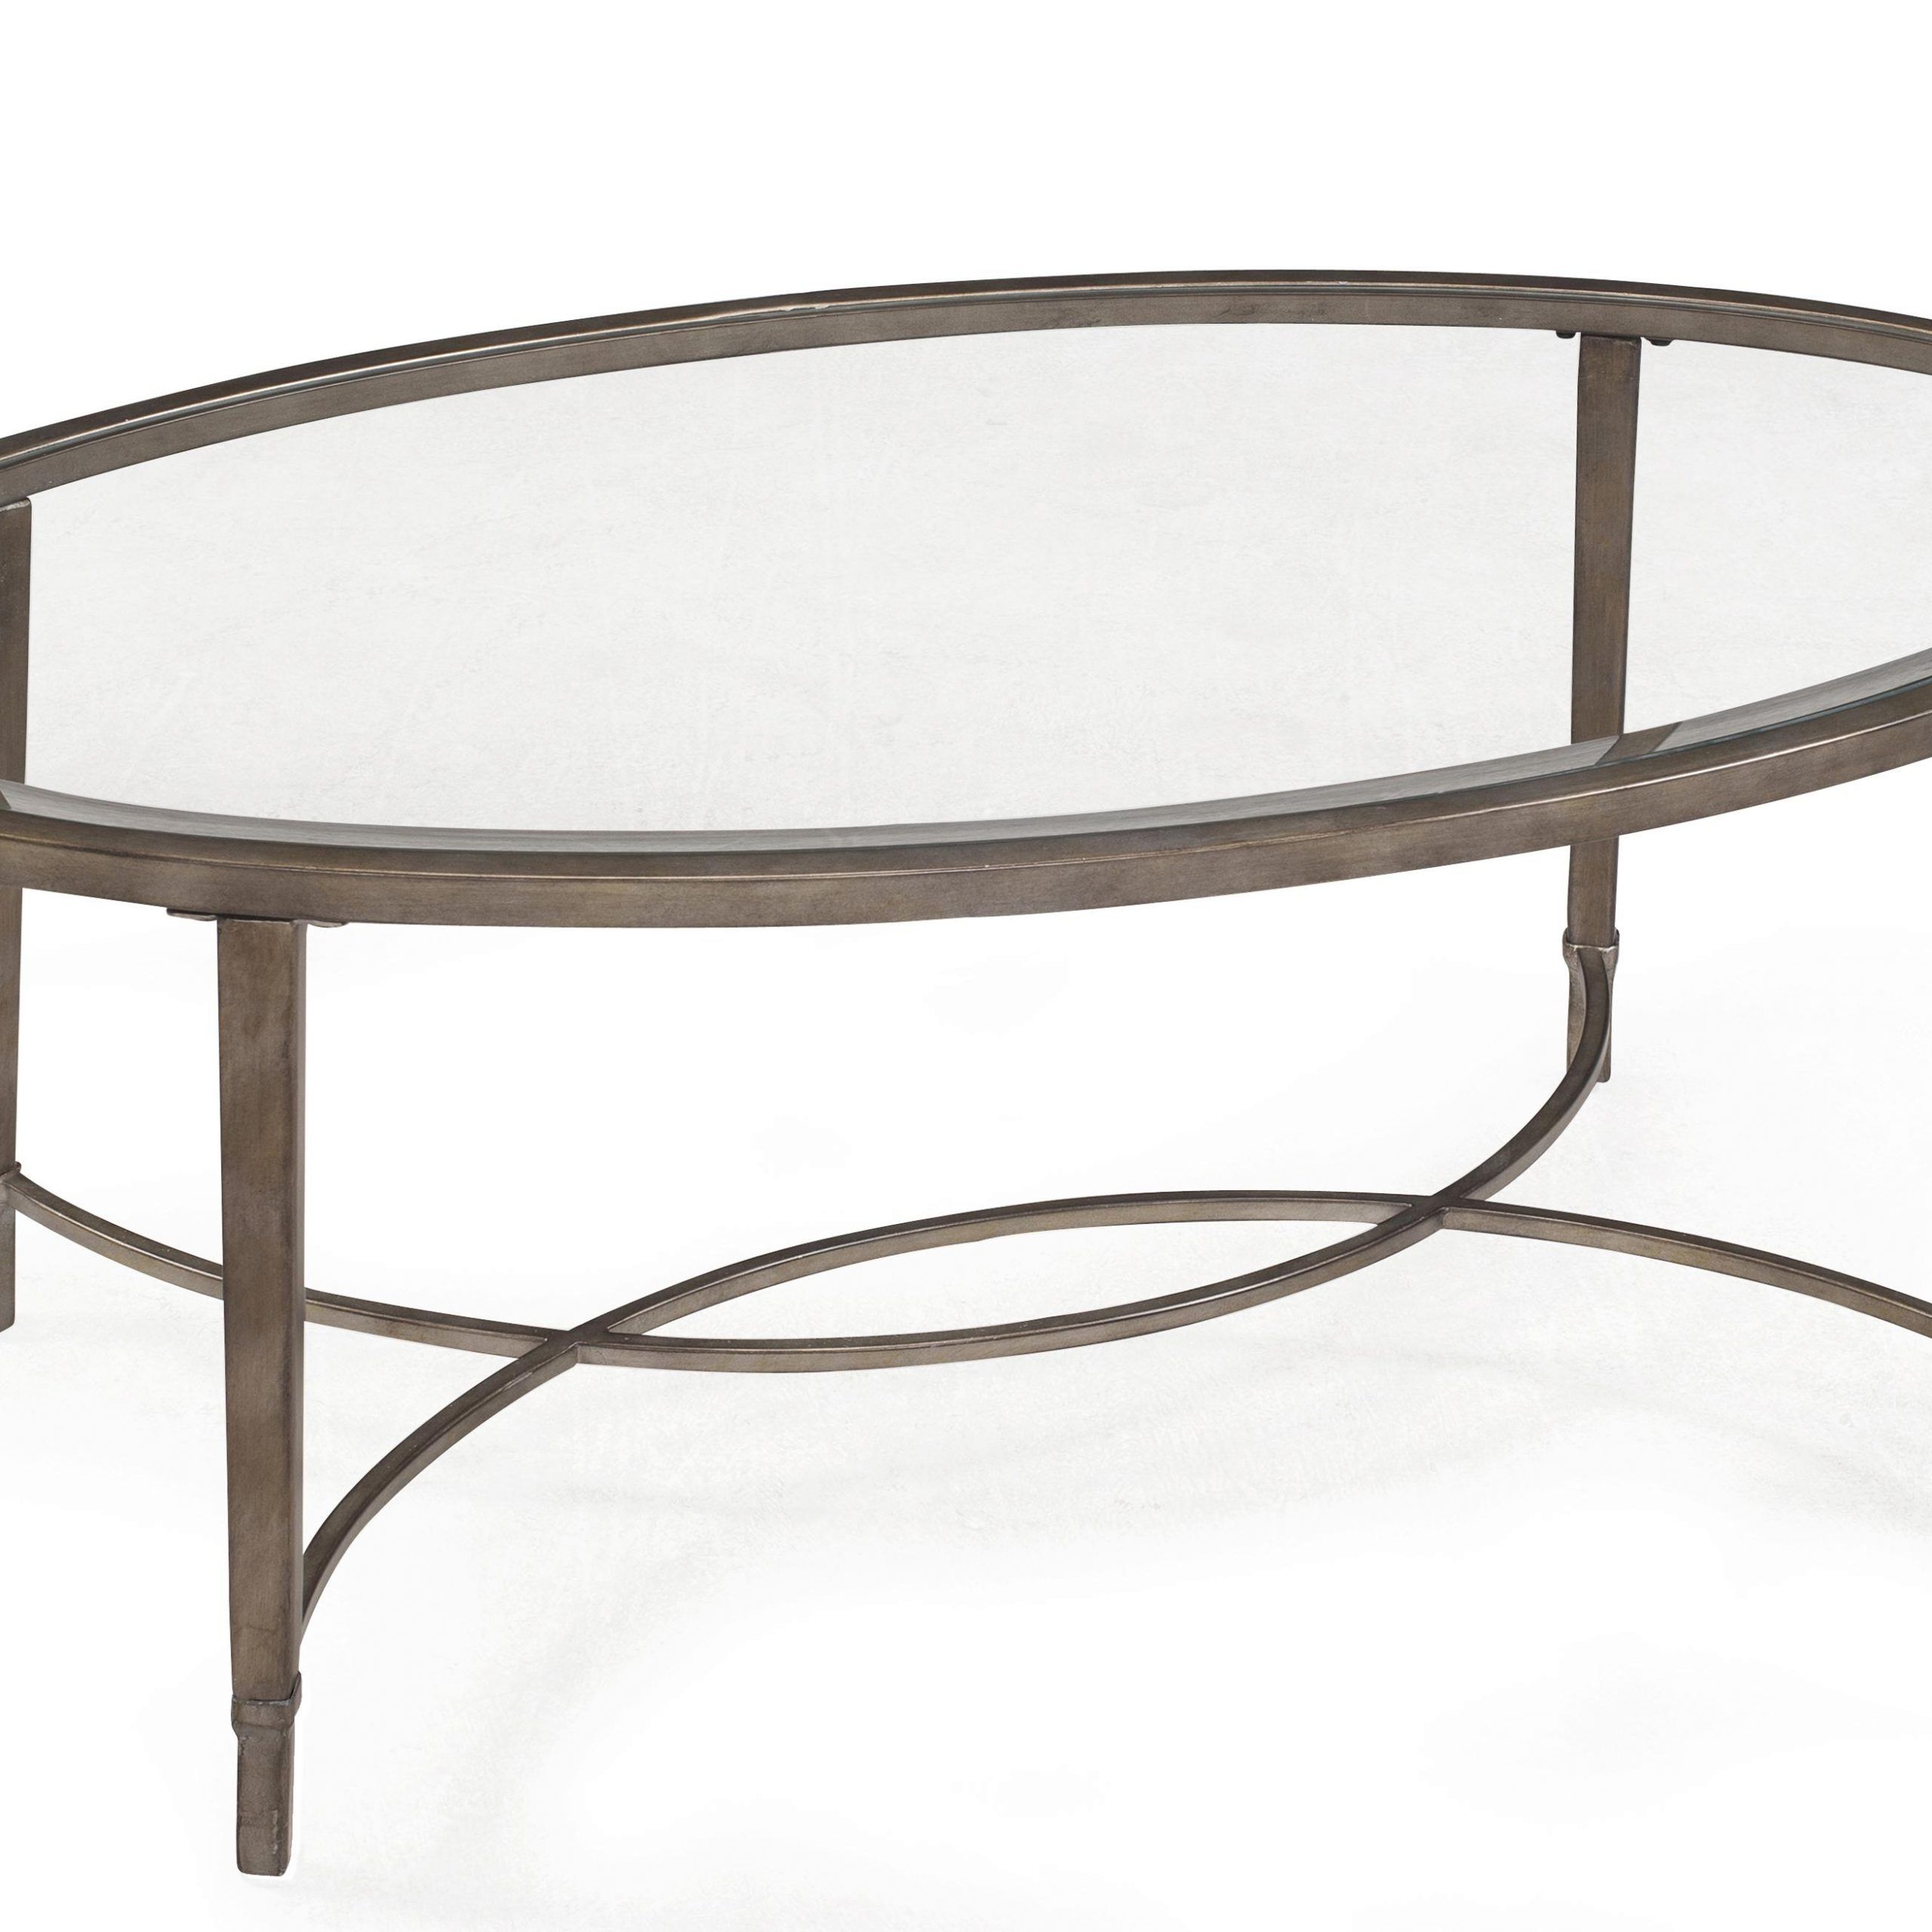 Magnussen Home Copia Mat1570330 Metal And Glass Oval Cocktail Table | Upper  Room Home Furnishings | Cocktail Or Coffee Table Intended For Glass Oval Coffee Tables (View 5 of 20)